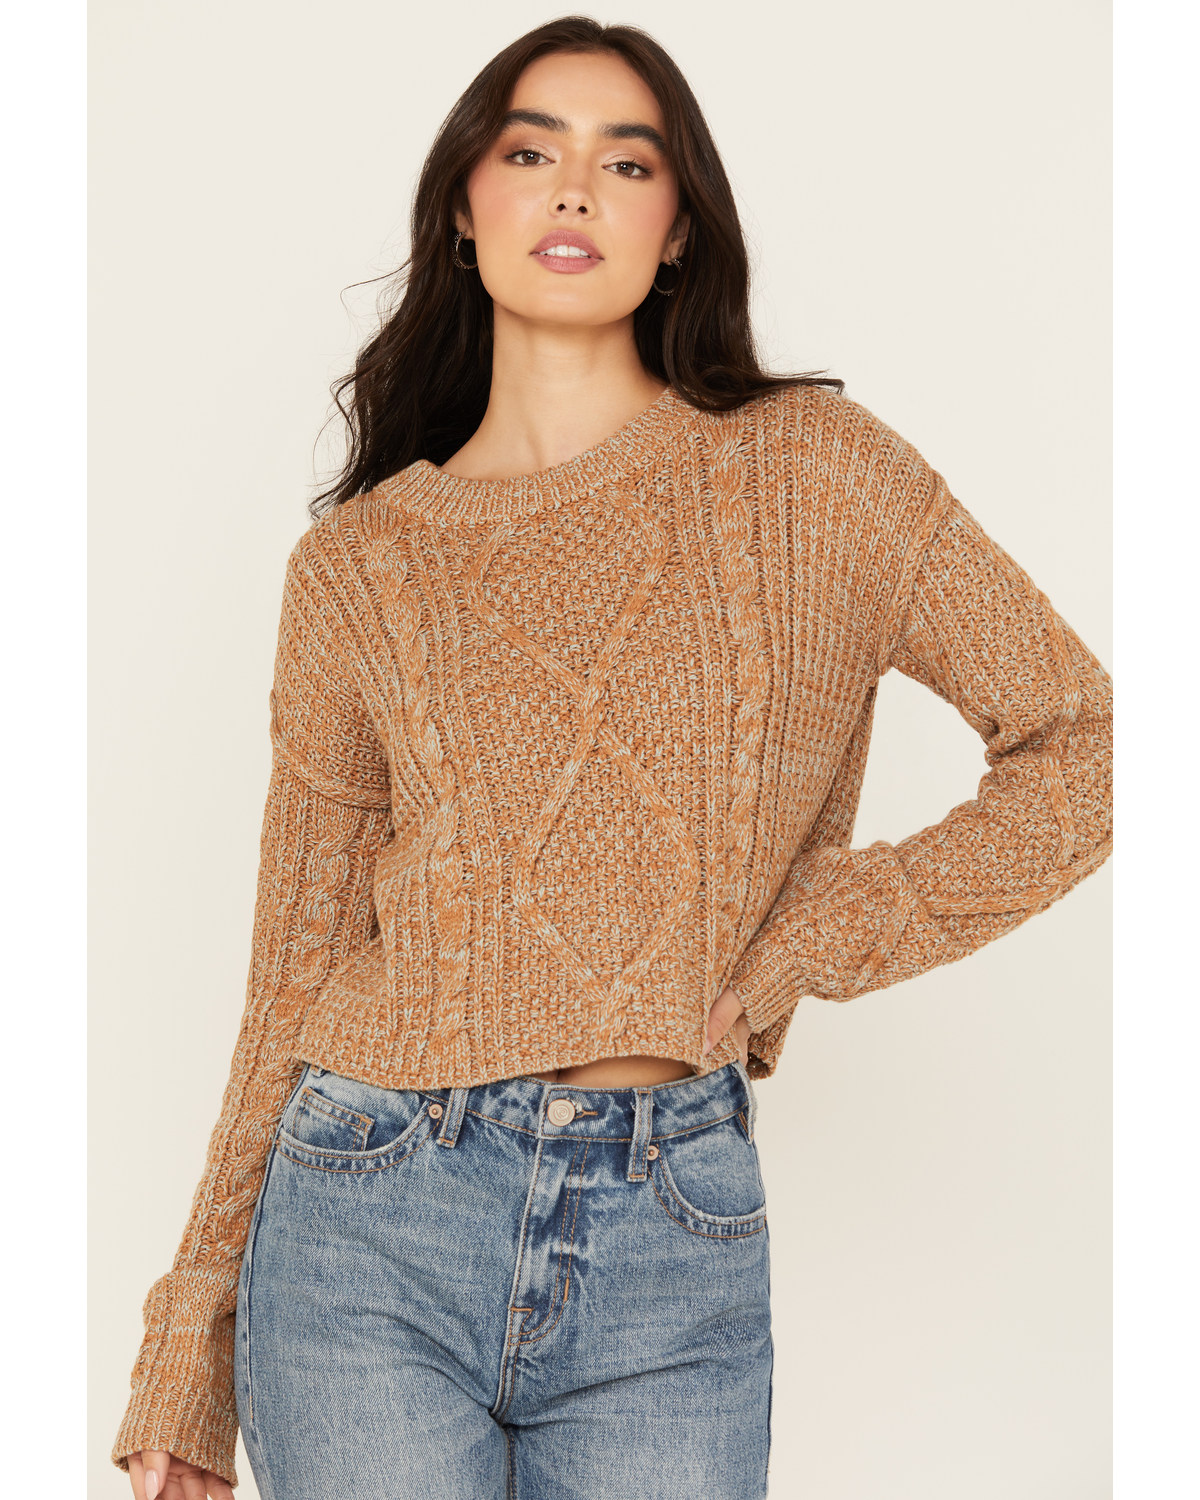 Mystree Women's Cable Knit Sweater